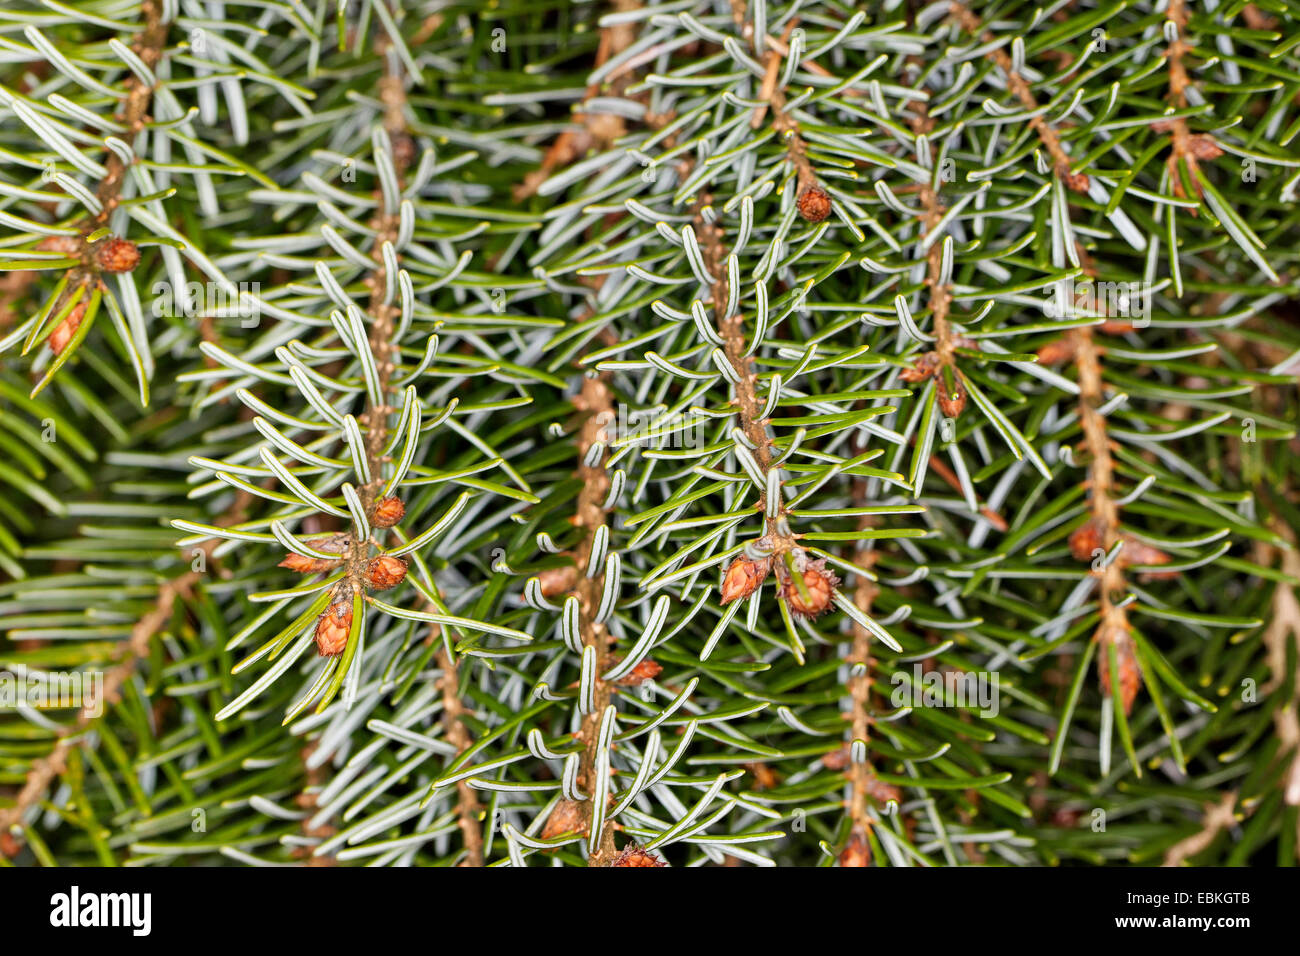 Serbian Spruce (Picea omorika), branches Stock Photo